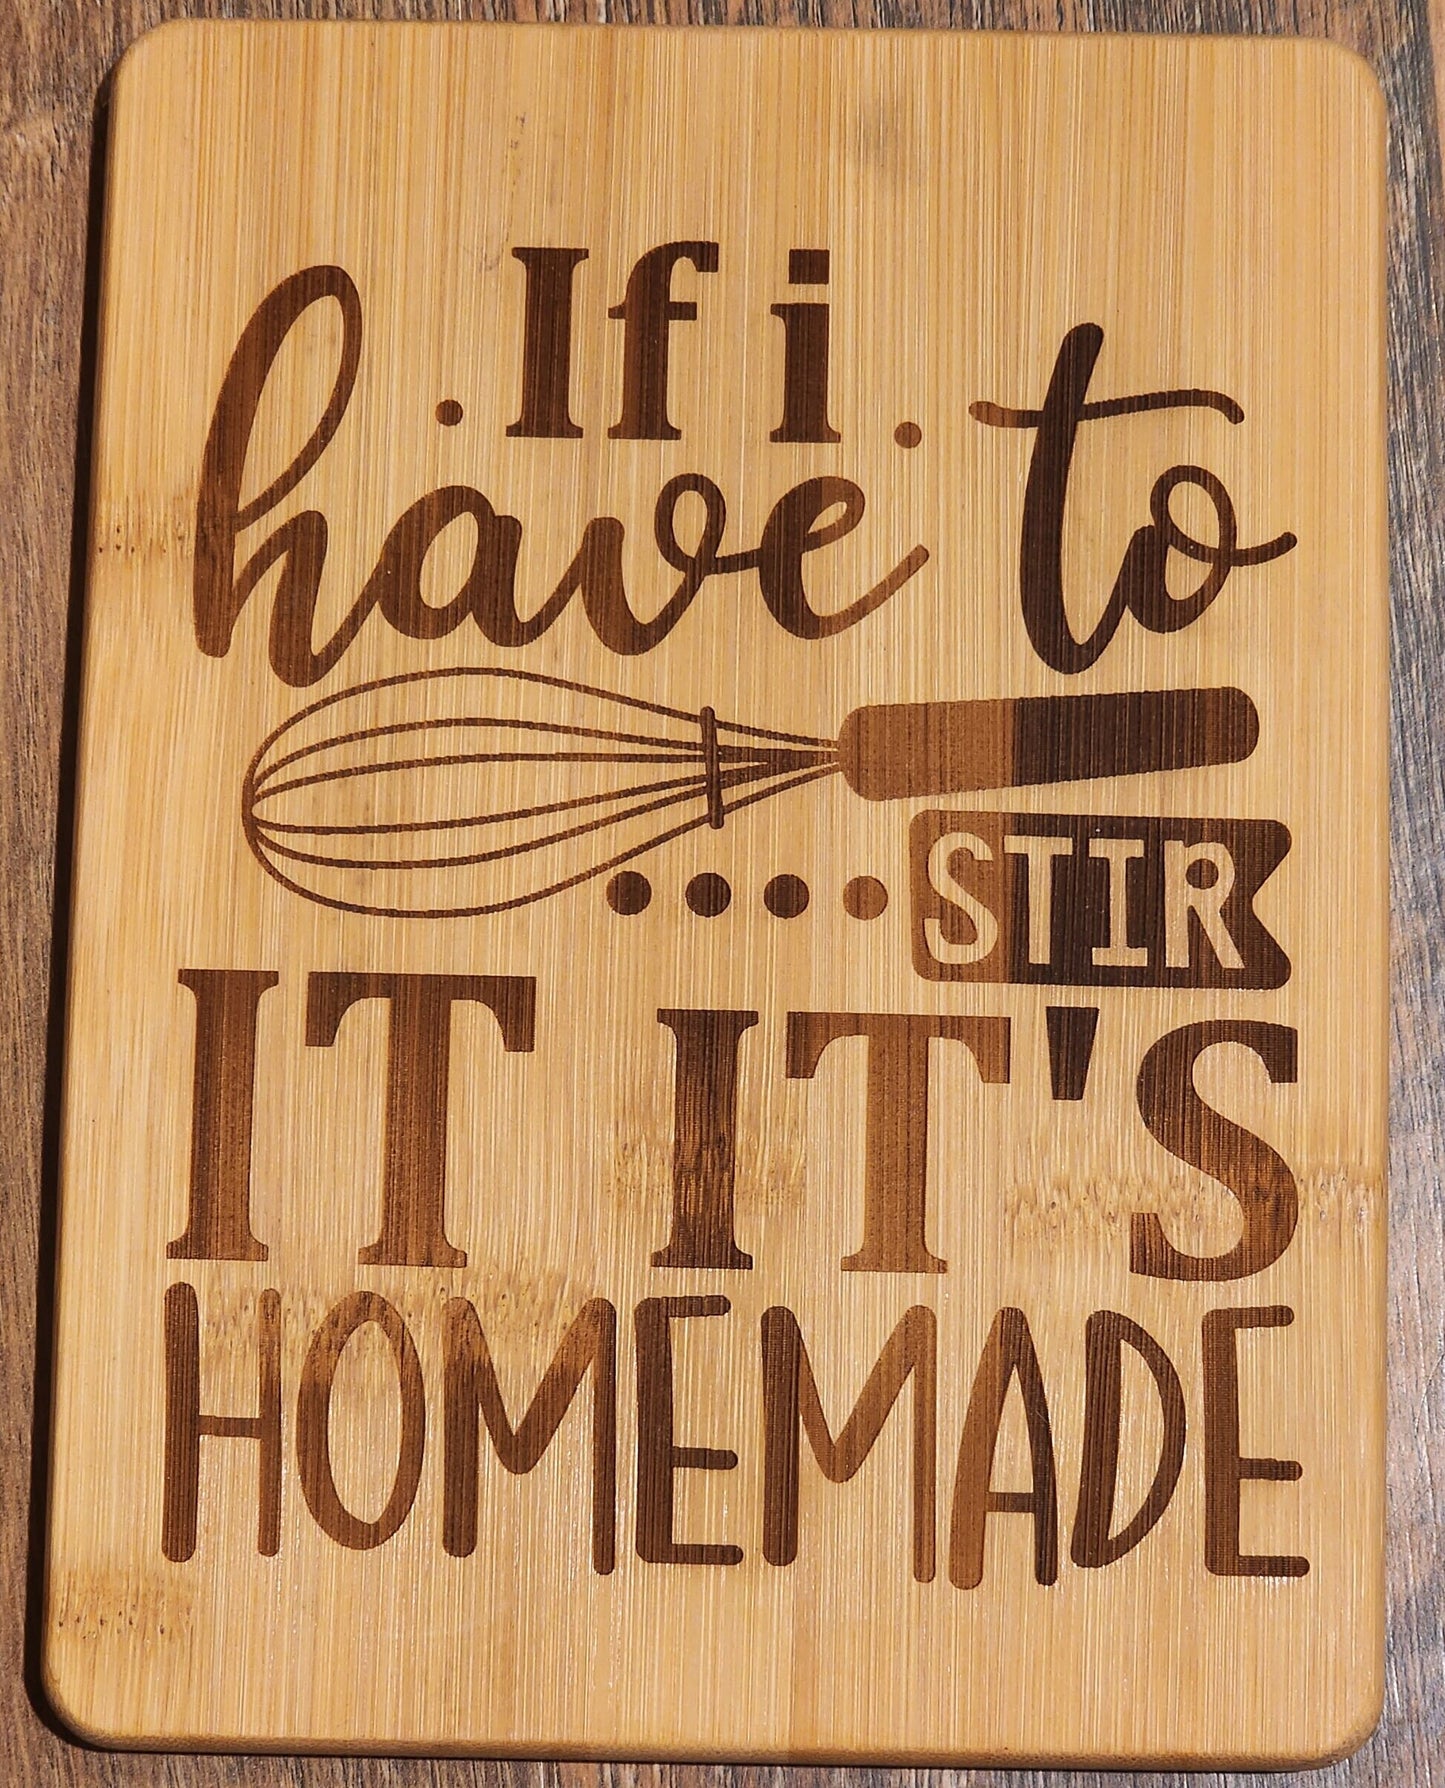 If I have to stir it it's homemade, country etched Bamboo Wood Cutting Board  - 8.75 x 6.875 inches